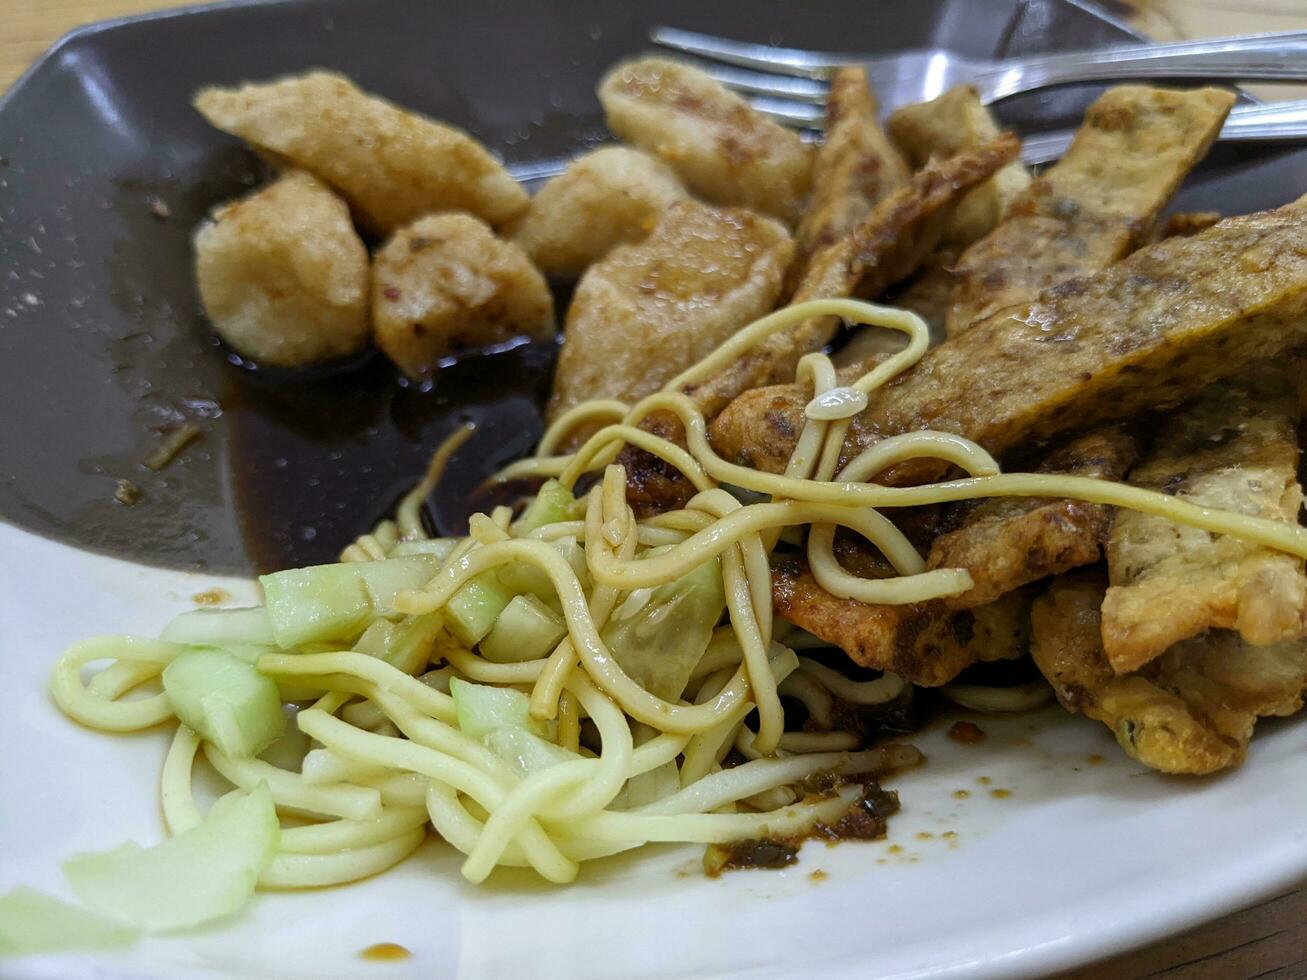 Traditional food from Palembang Sumatra Indonesia, Empek empek with yellow noodles. The photo is suitable to use for traditional food background and food content media.